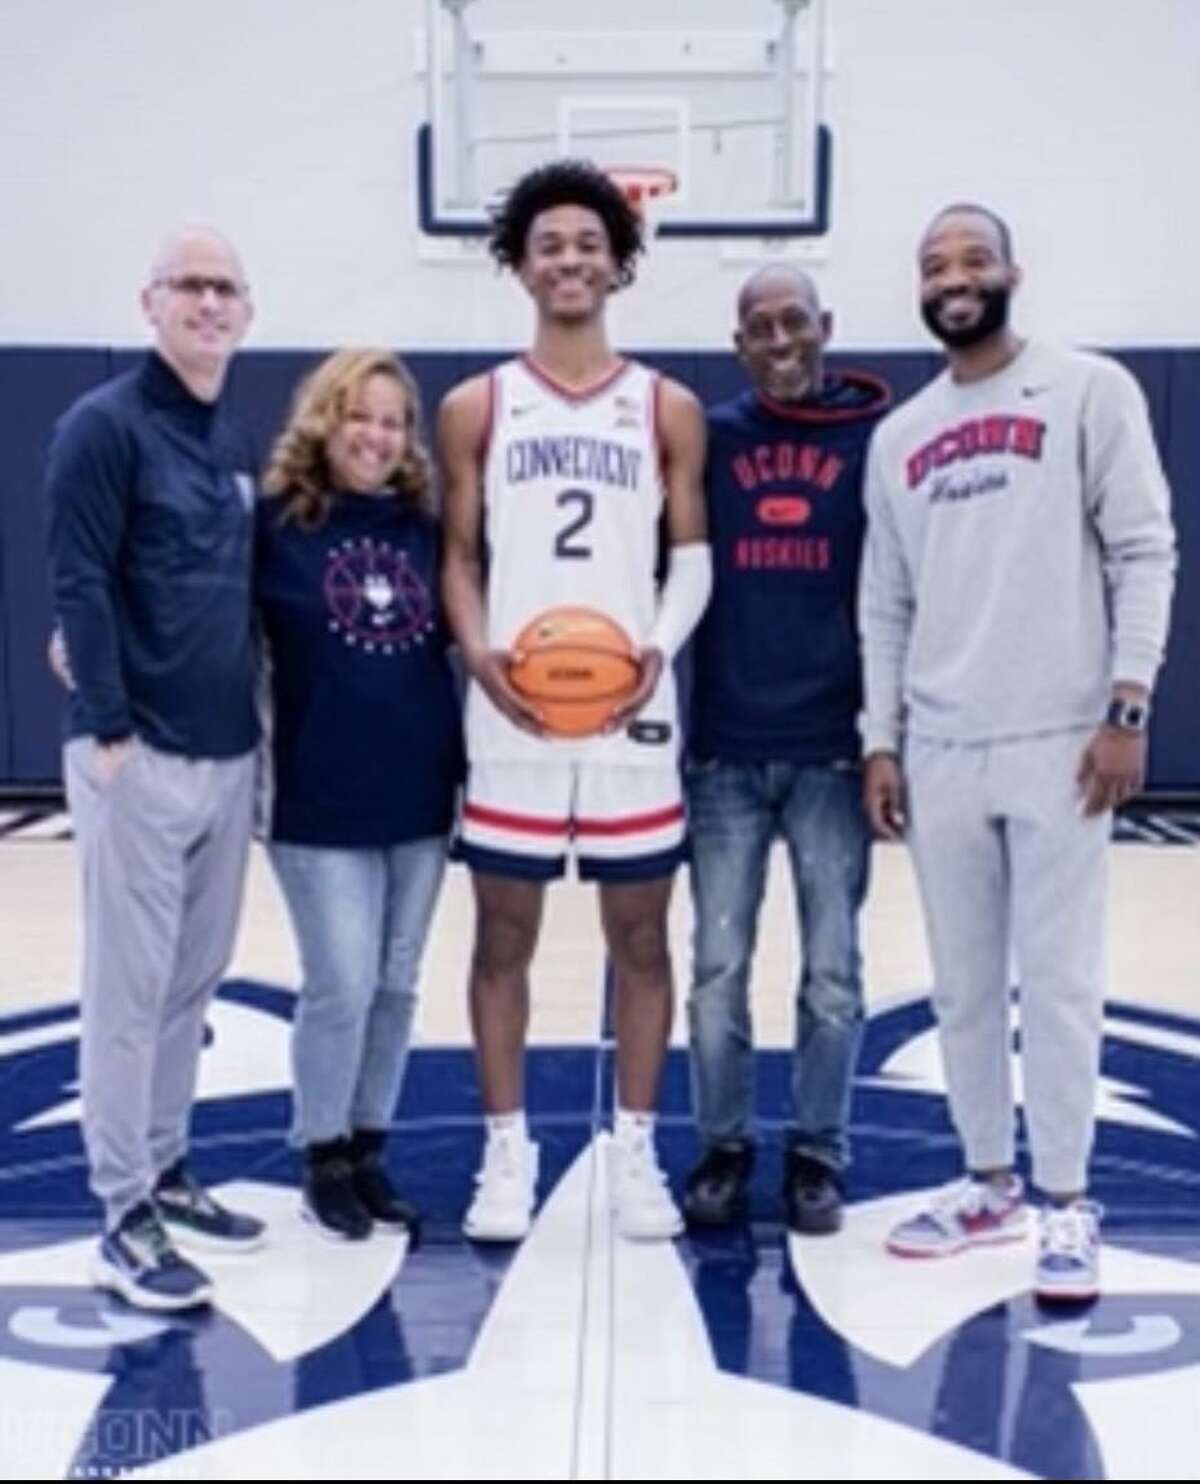 During his recruiting visit to UConn this weekend, Stephon Castle, a 6-foot-6 guard from Georgia, posed with (left to right) UConn coach Dan Hurley, Castle's mother, Quannette, his father, Stacey, and UConn associate head coach Kimani Young.